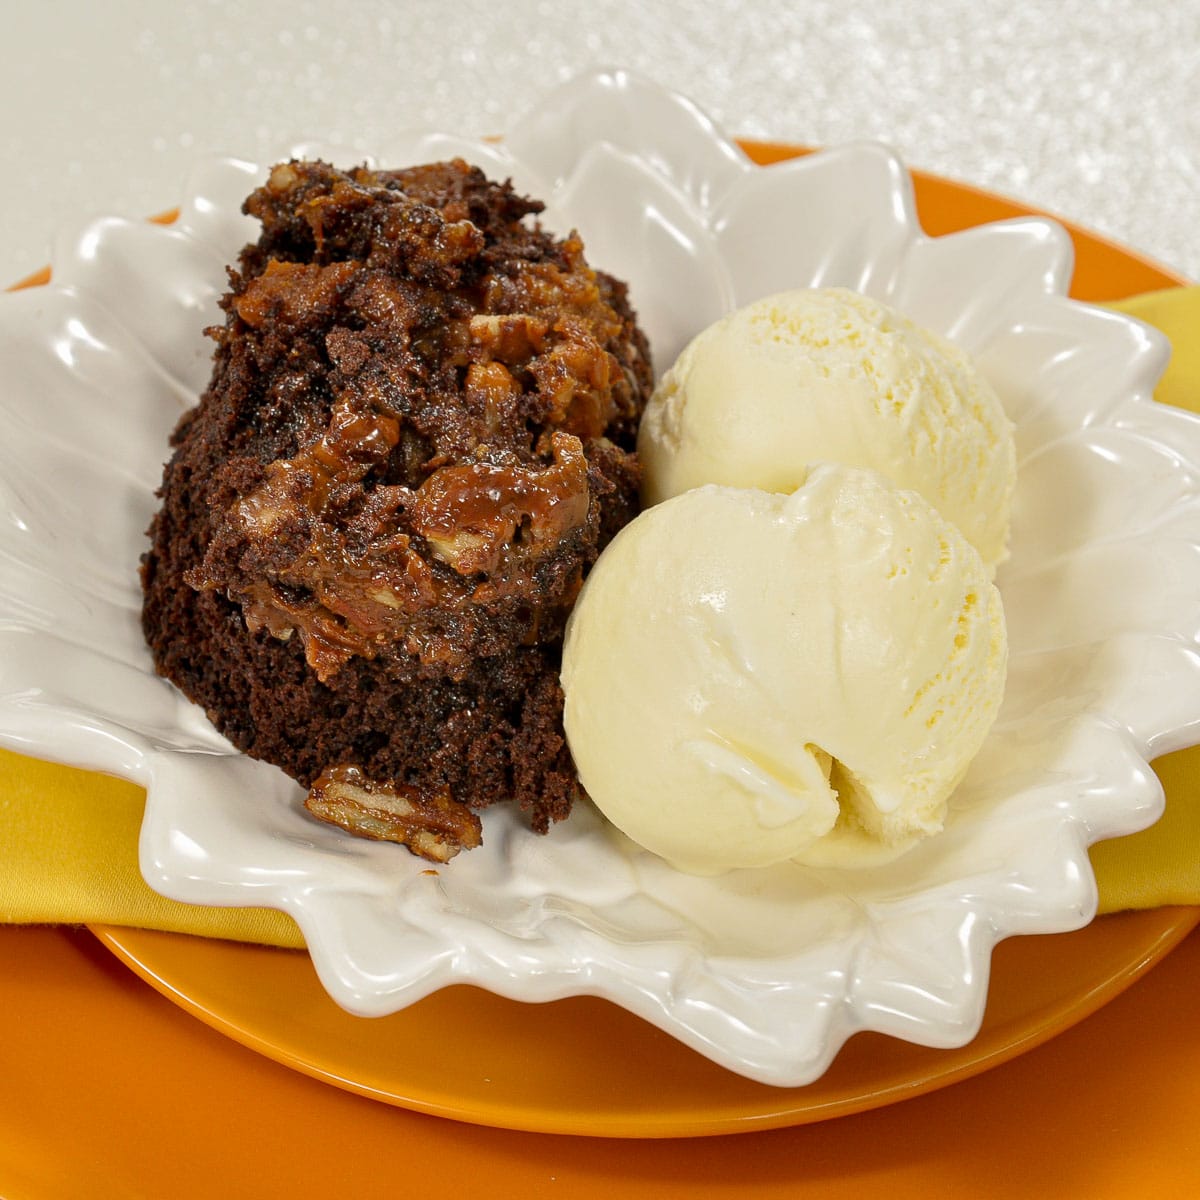 Skillet Brownies with vanilla ice cream on  white and orange plates.